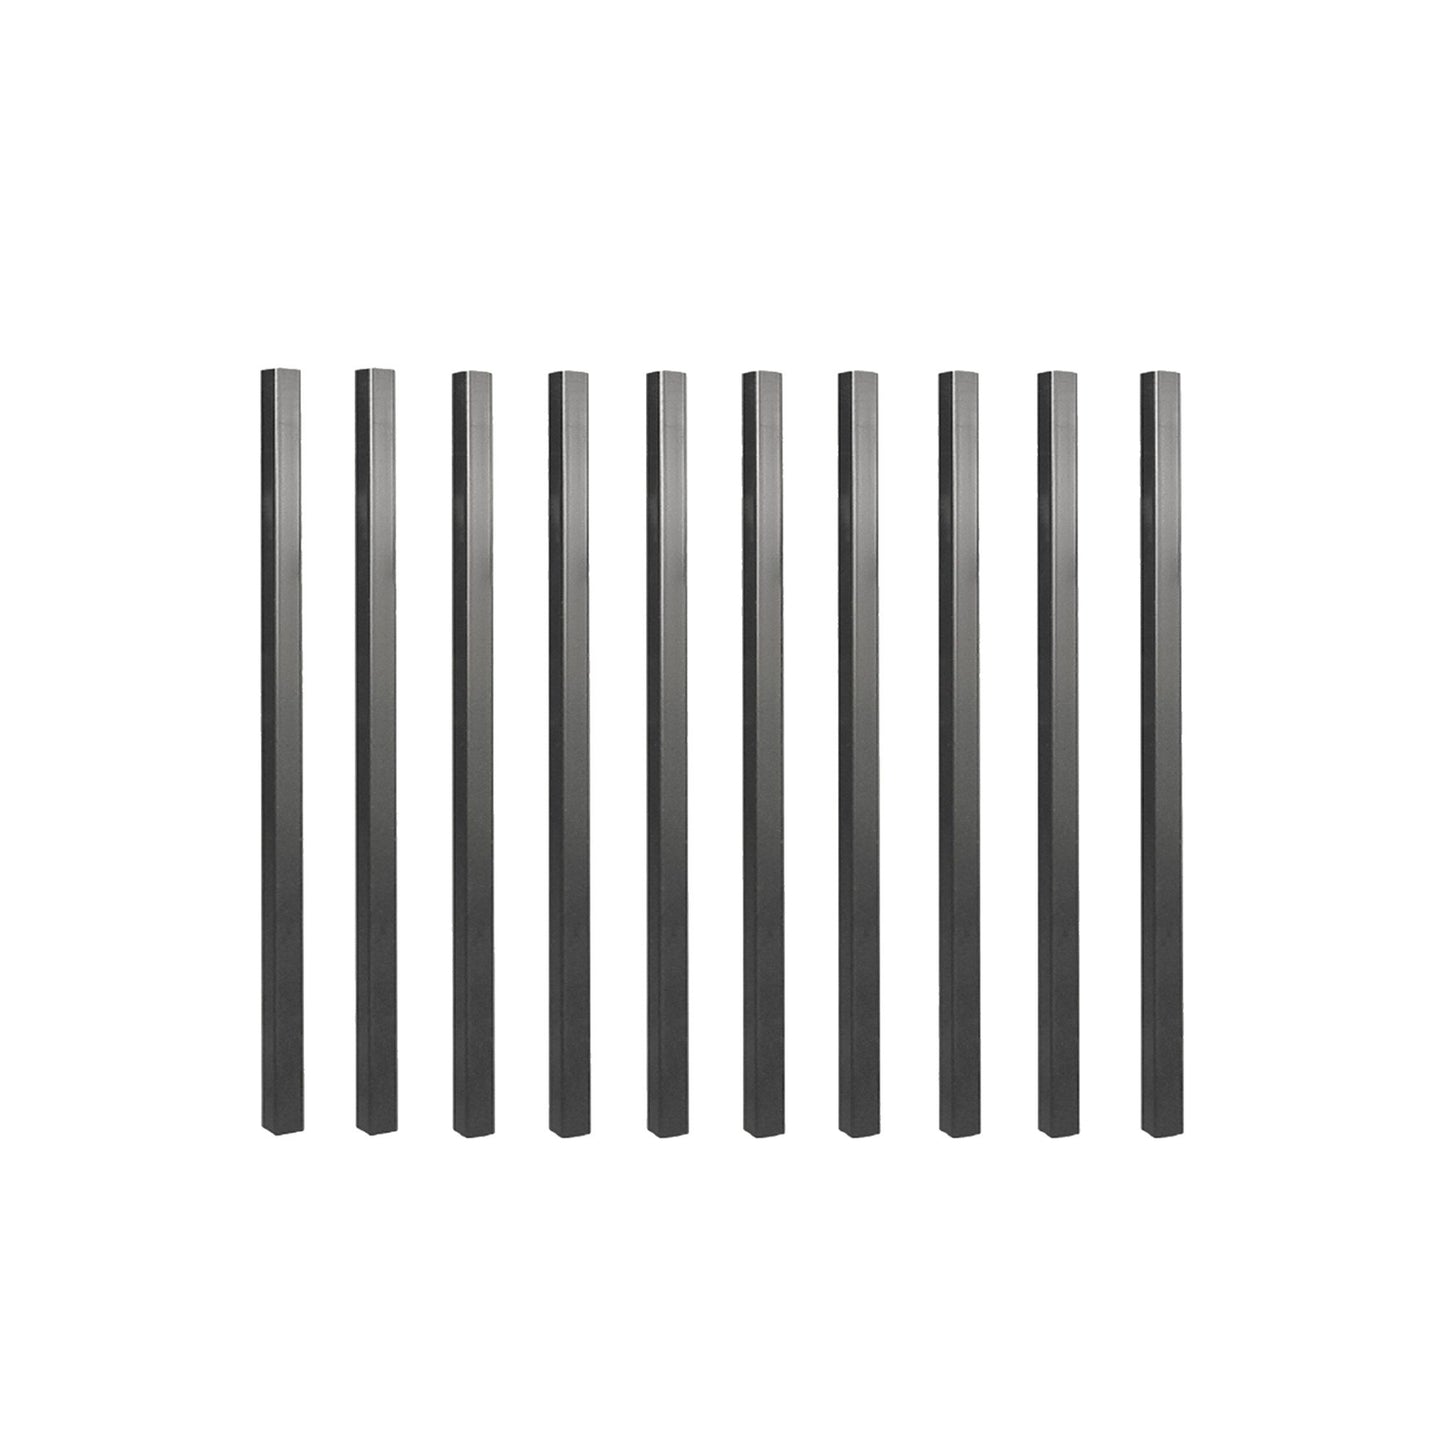 Square Balusters – 32″ Long x 3/4″ Wide Black Square Tubing Galvanized Steel Balusters (10 pcs)